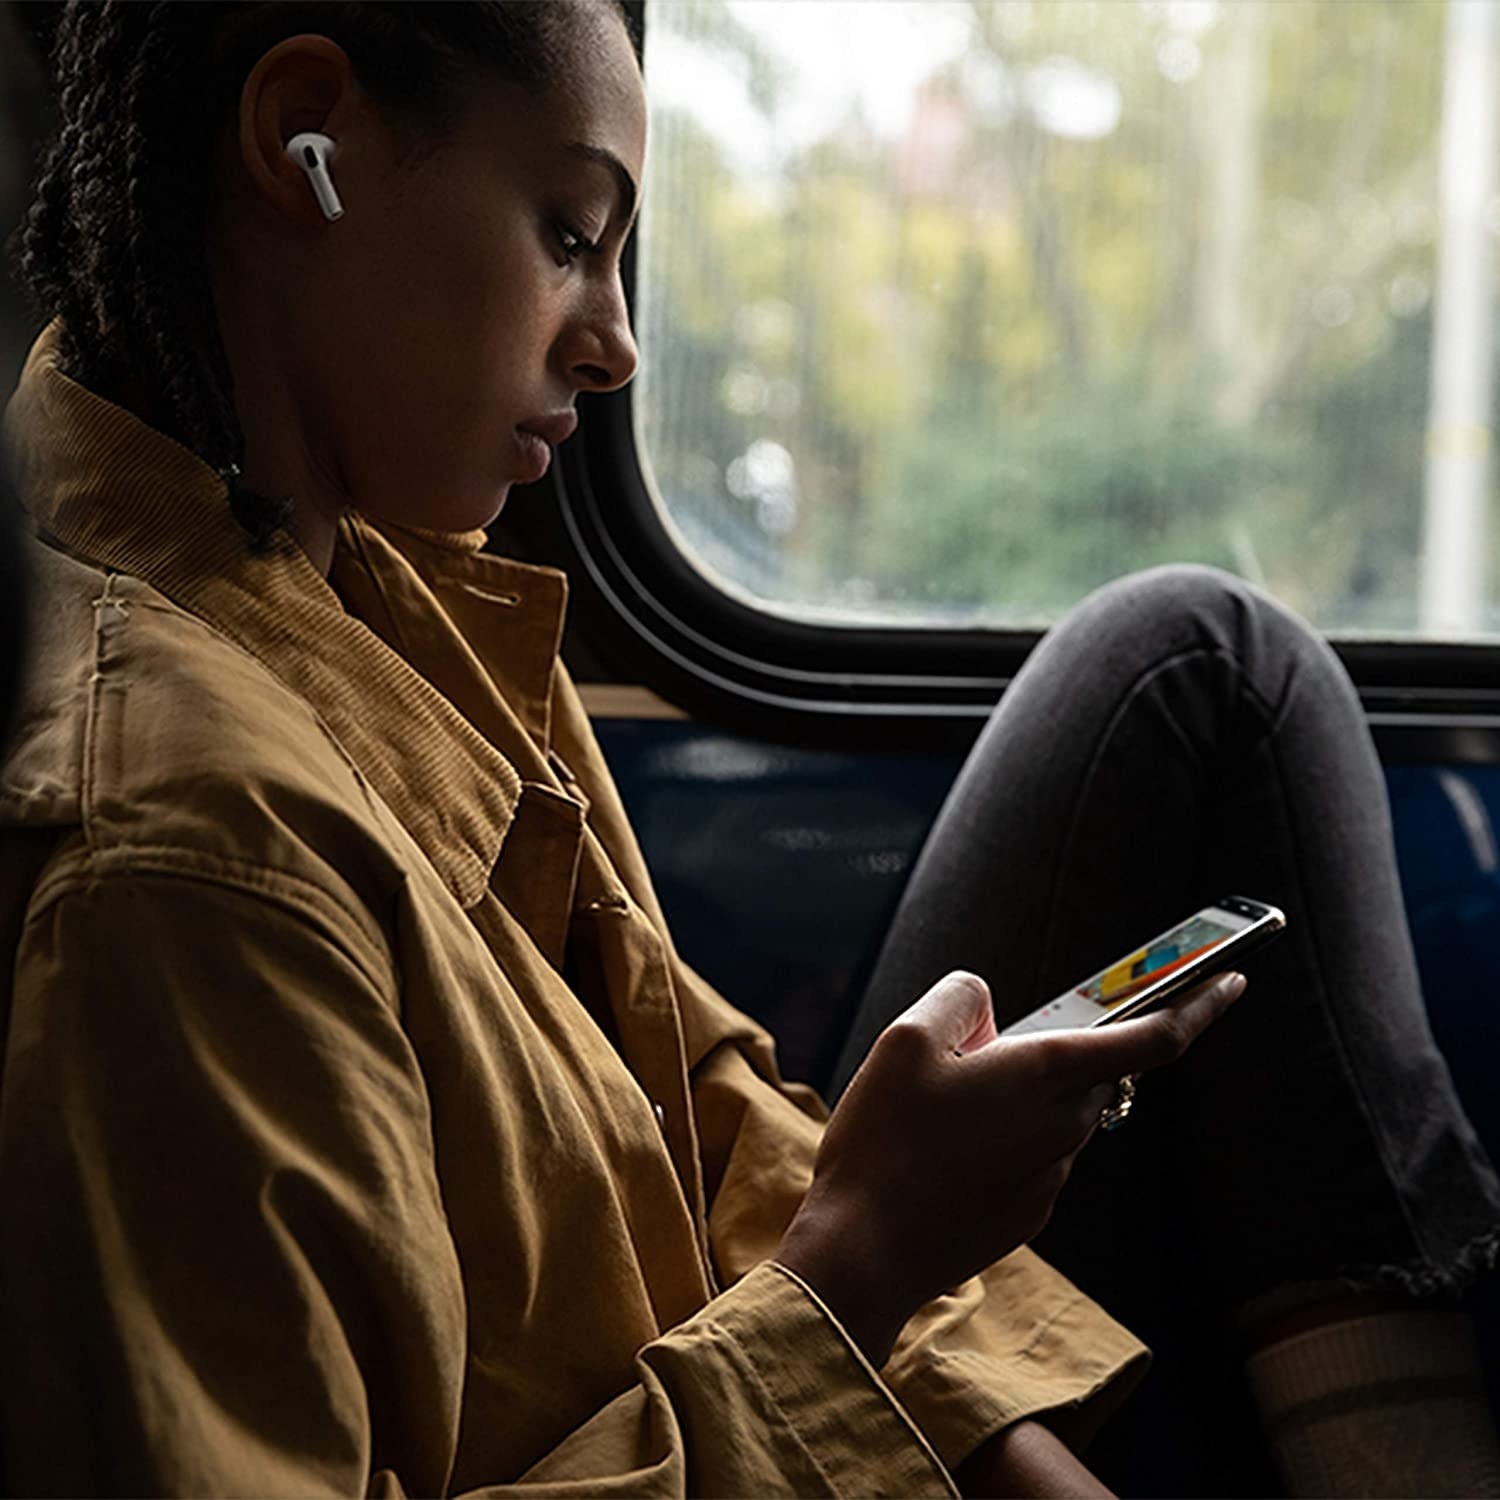 A person sitting in a car listening to music with wireless earphones